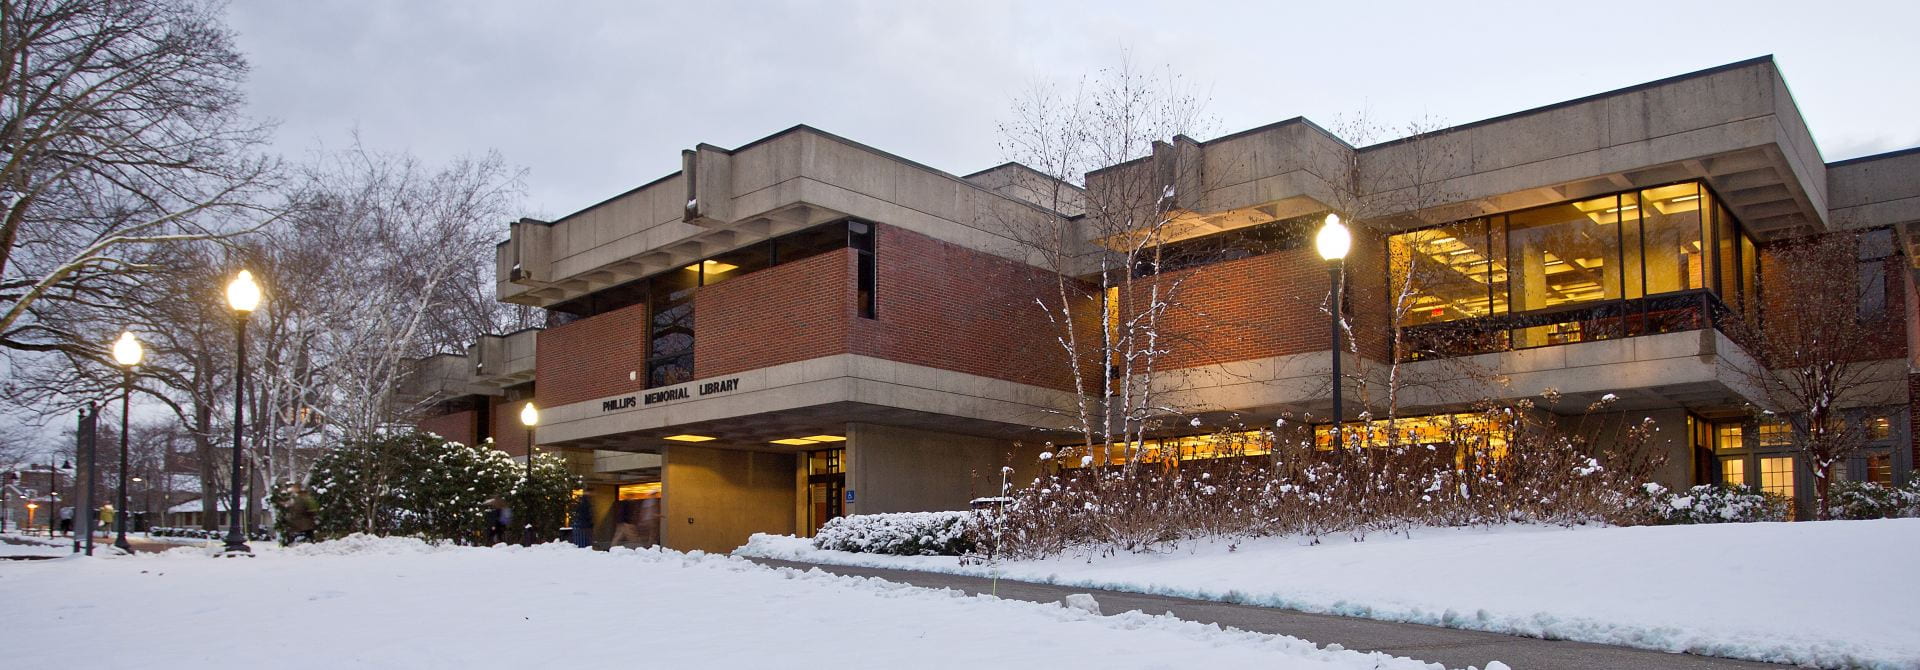 Library, a Brick Building, with Snow on the Ground and a Cleared Sidewalk.